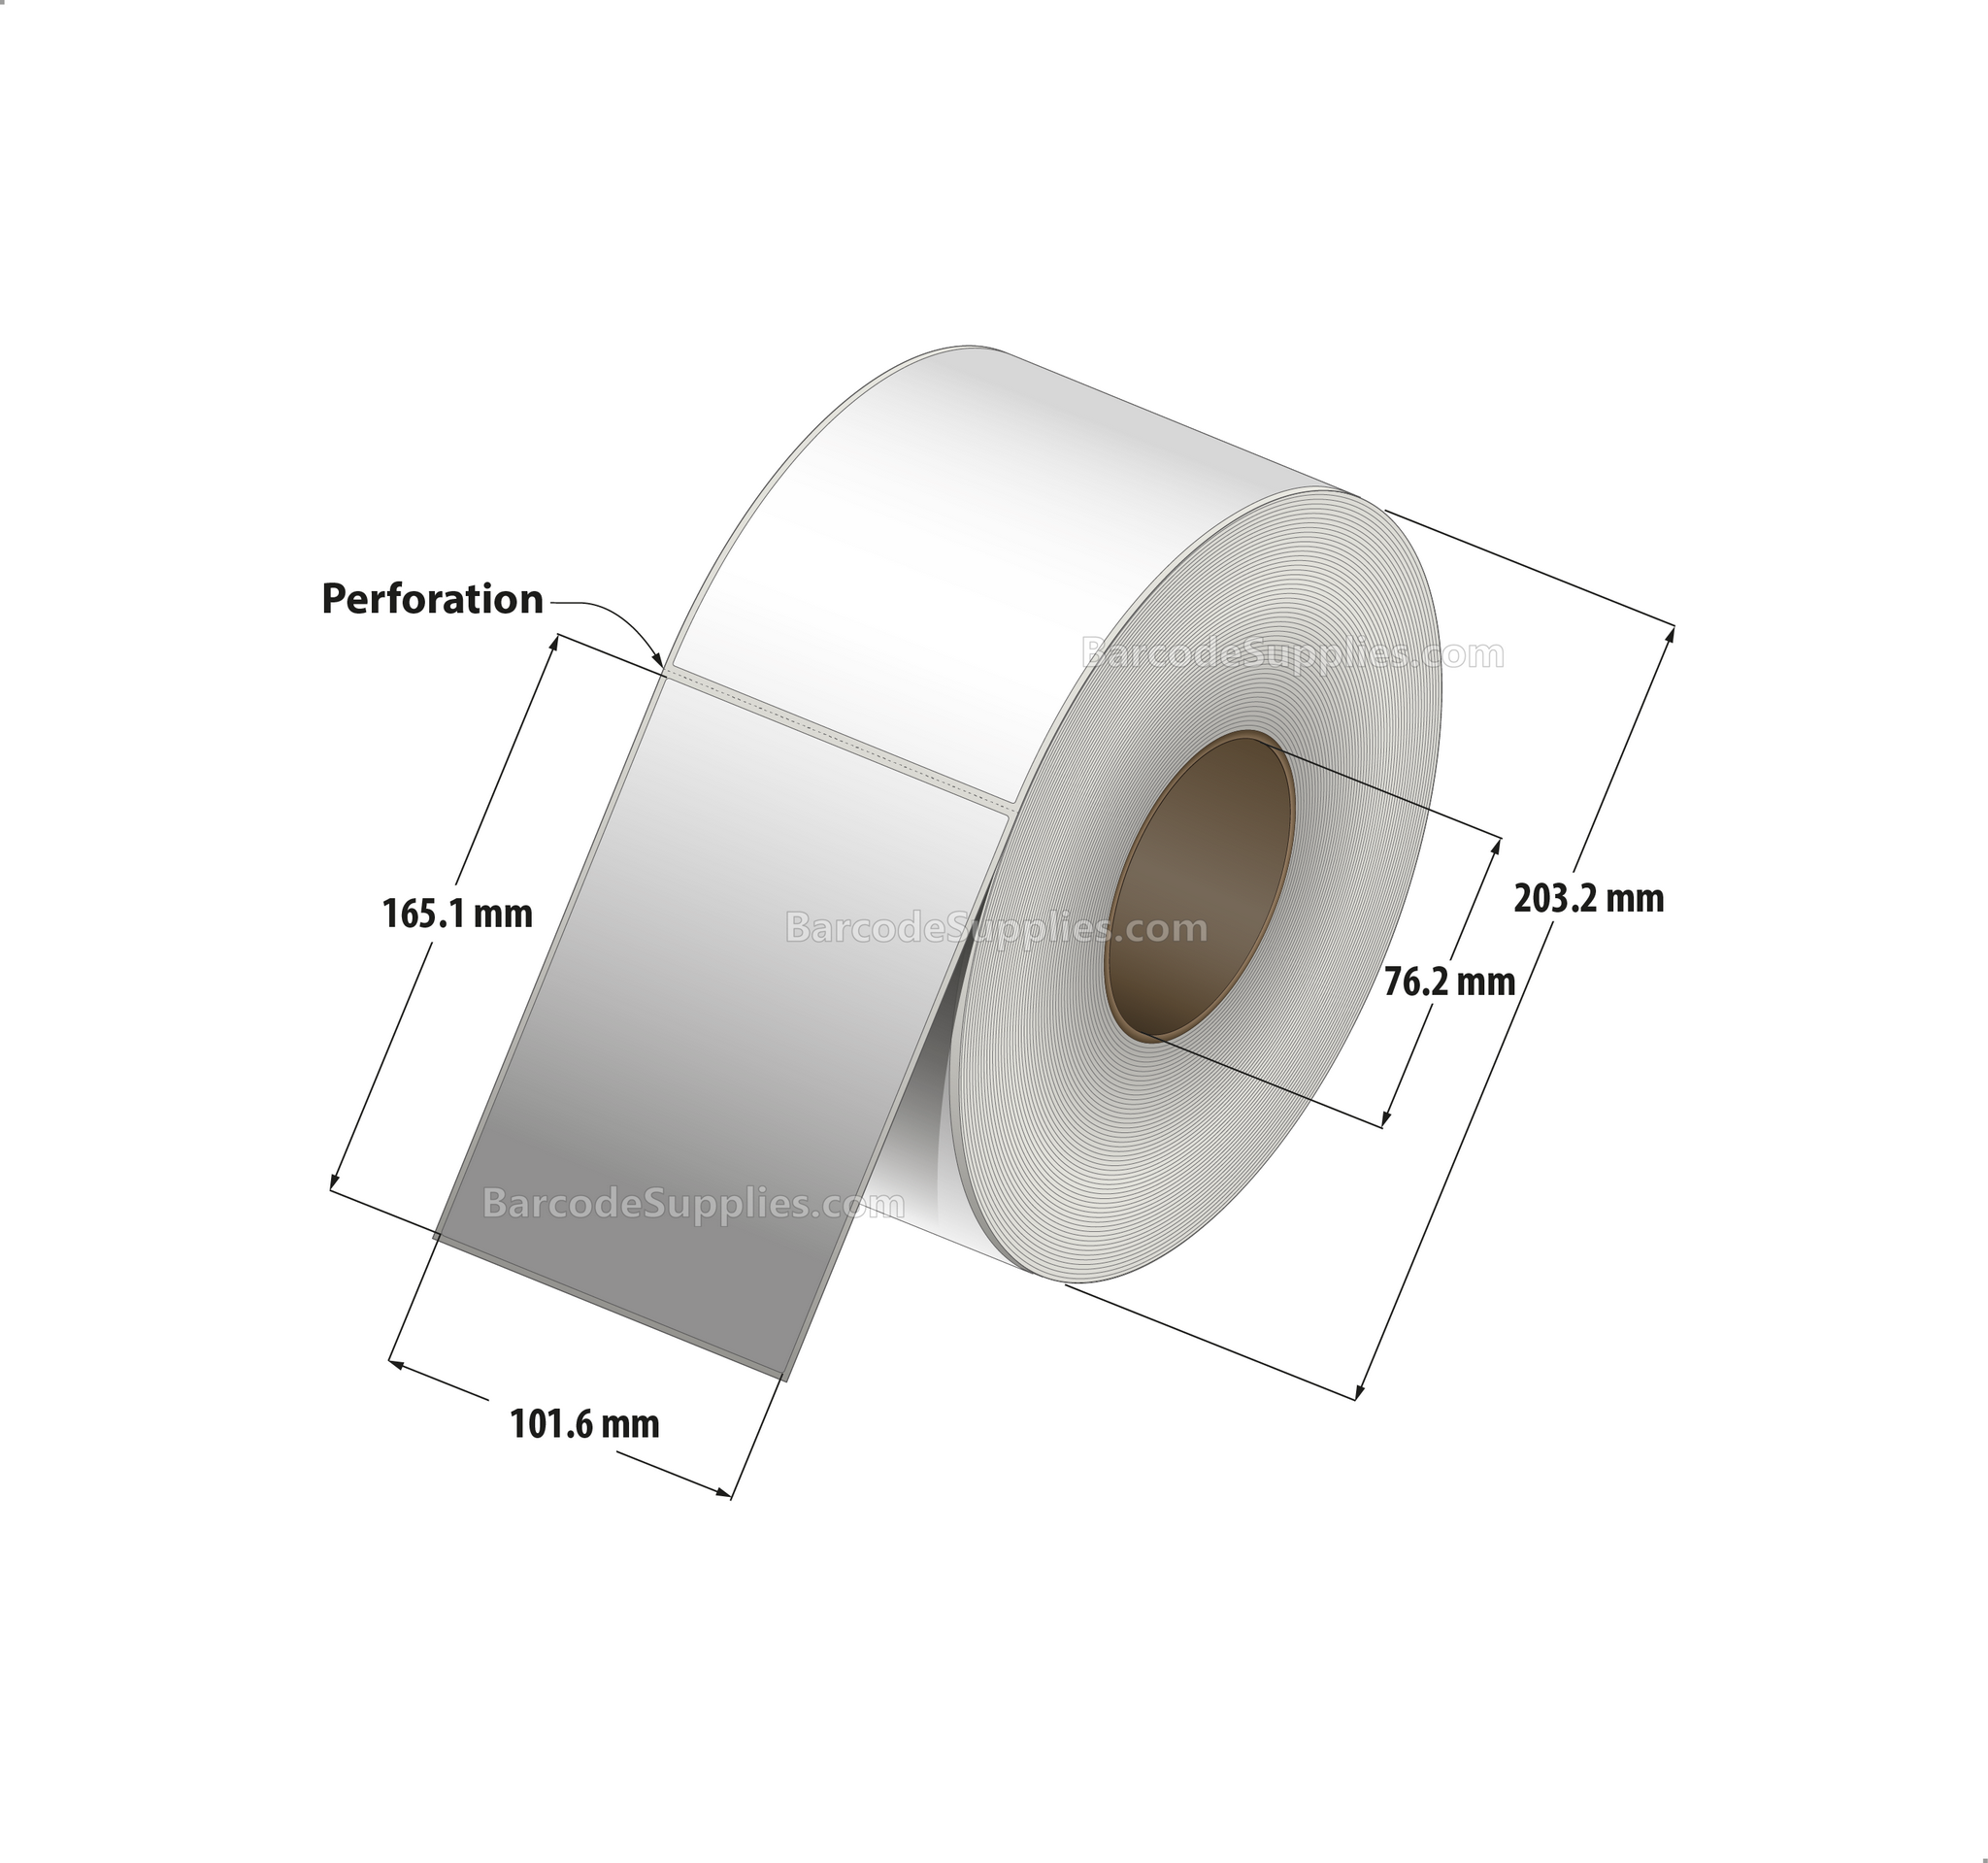 4 x 6.5 Thermal Transfer White Labels With Rubber Adhesive - Perforated - 900 Labels Per Roll - Carton Of 4 Rolls - 3600 Labels Total - MPN: CTT400650-3P